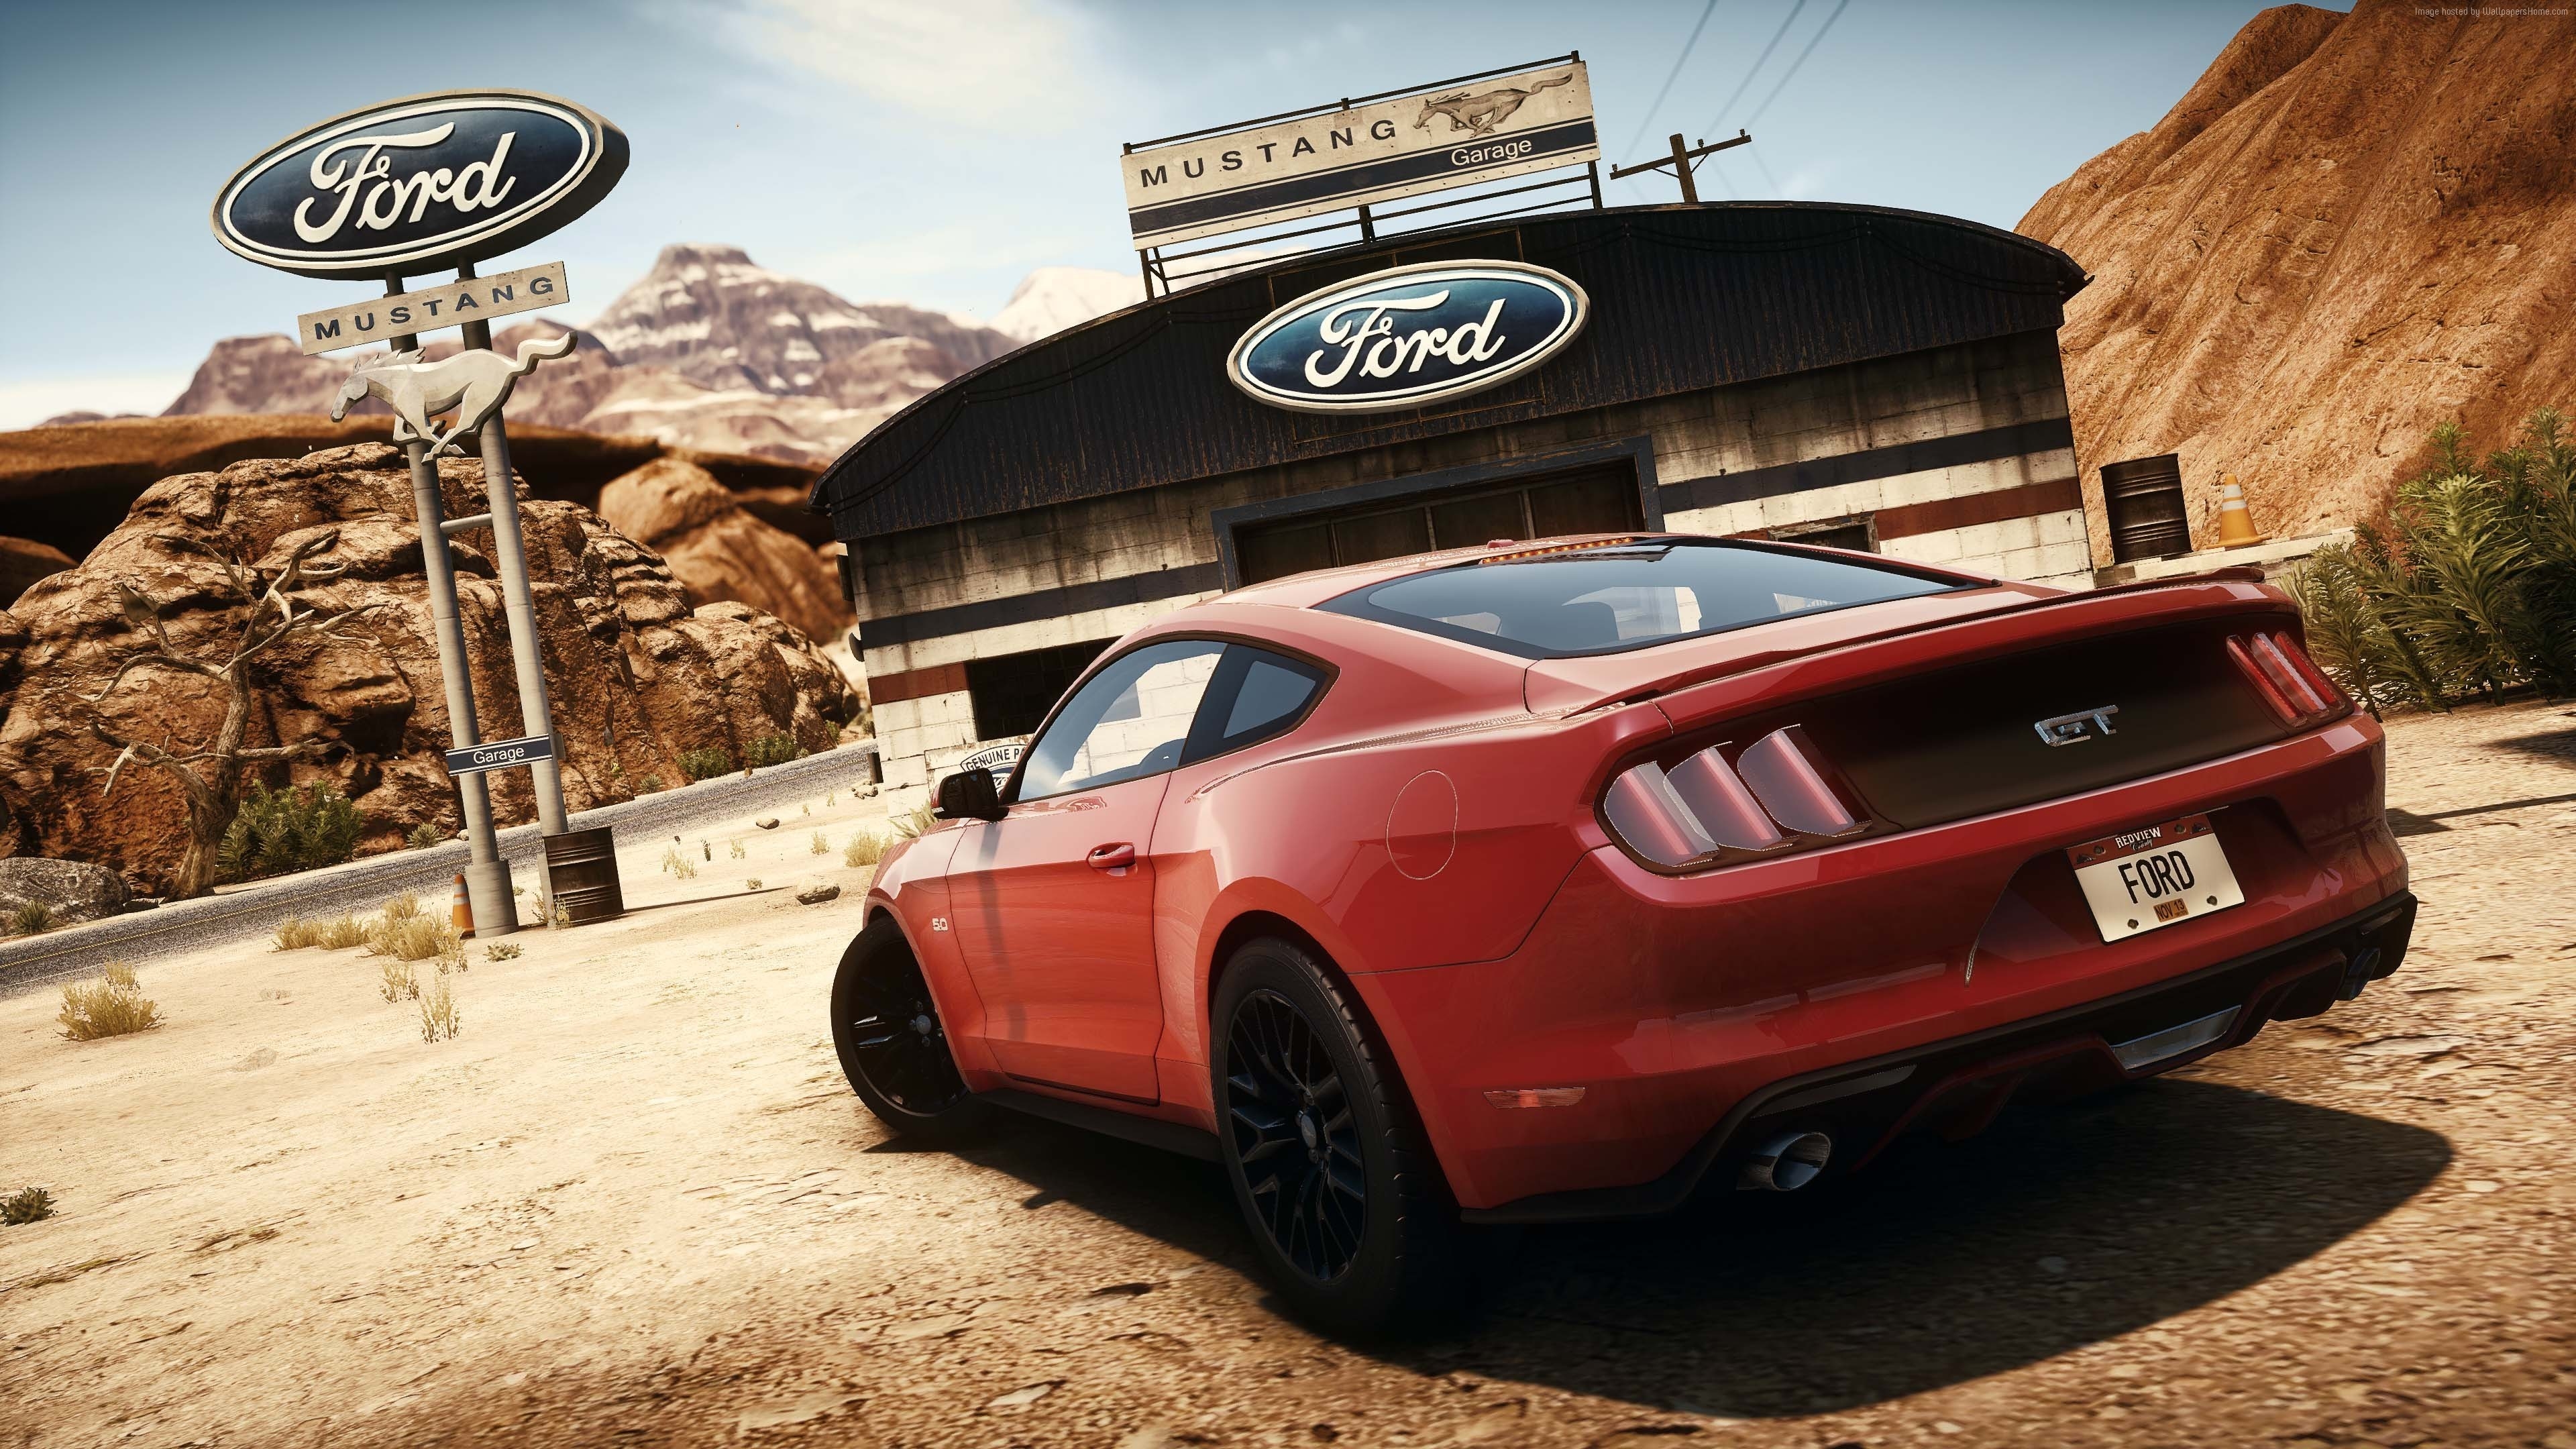 Need For Speed Ford Mustang for 3840 x 2160 Ultra HD resolution